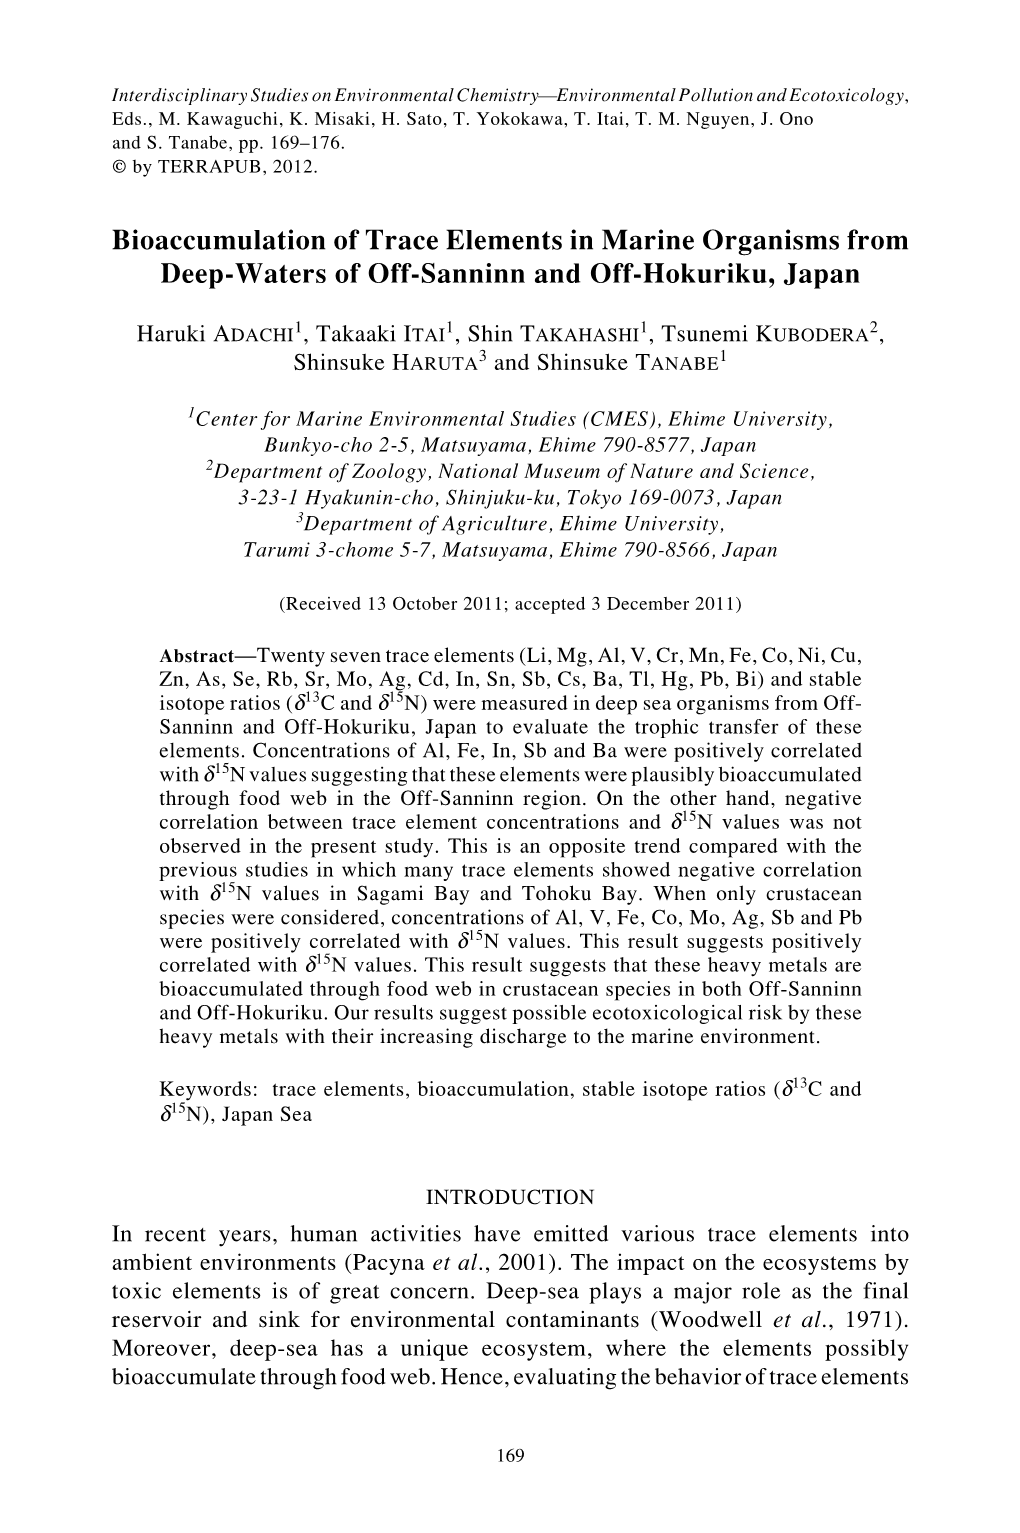 Bioaccumulation of Trace Elements in Marine Organisms from Deep-Waters of Off-Sanninn and Off-Hokuriku, Japan